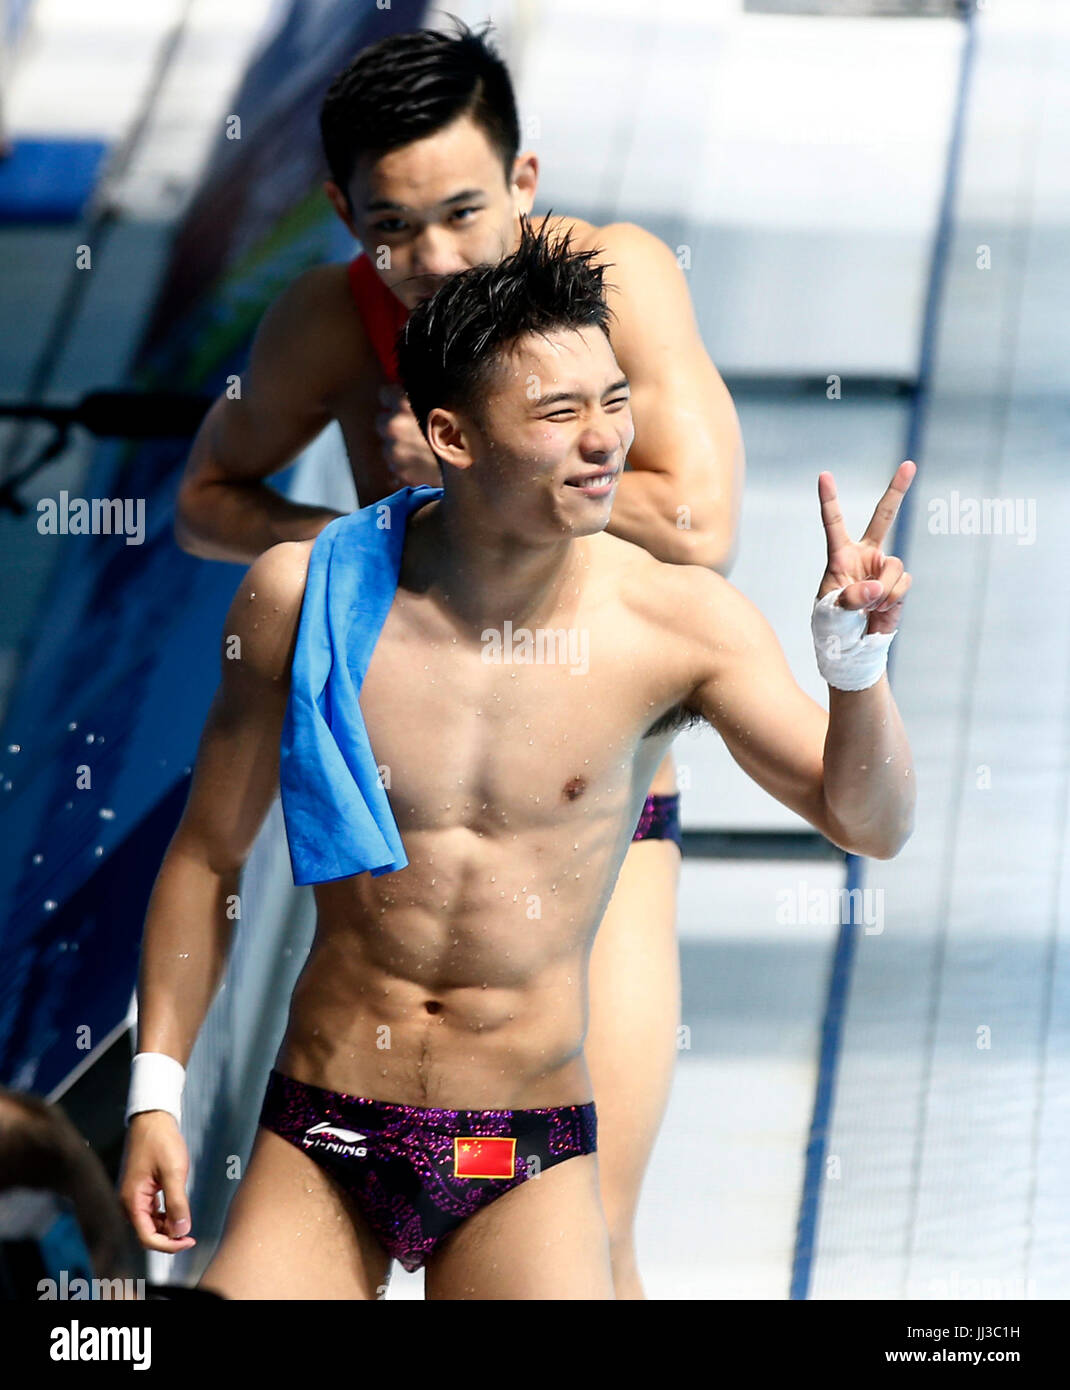 Budapest, Hungary. 17th July, 2017. China's Chen Aisen (Bottom)/Yang Hao  celebrate after the men's 10m platform synchronised final of Diving at the  17th FINA World Championships at Duna Arena in Budapest, Hungary